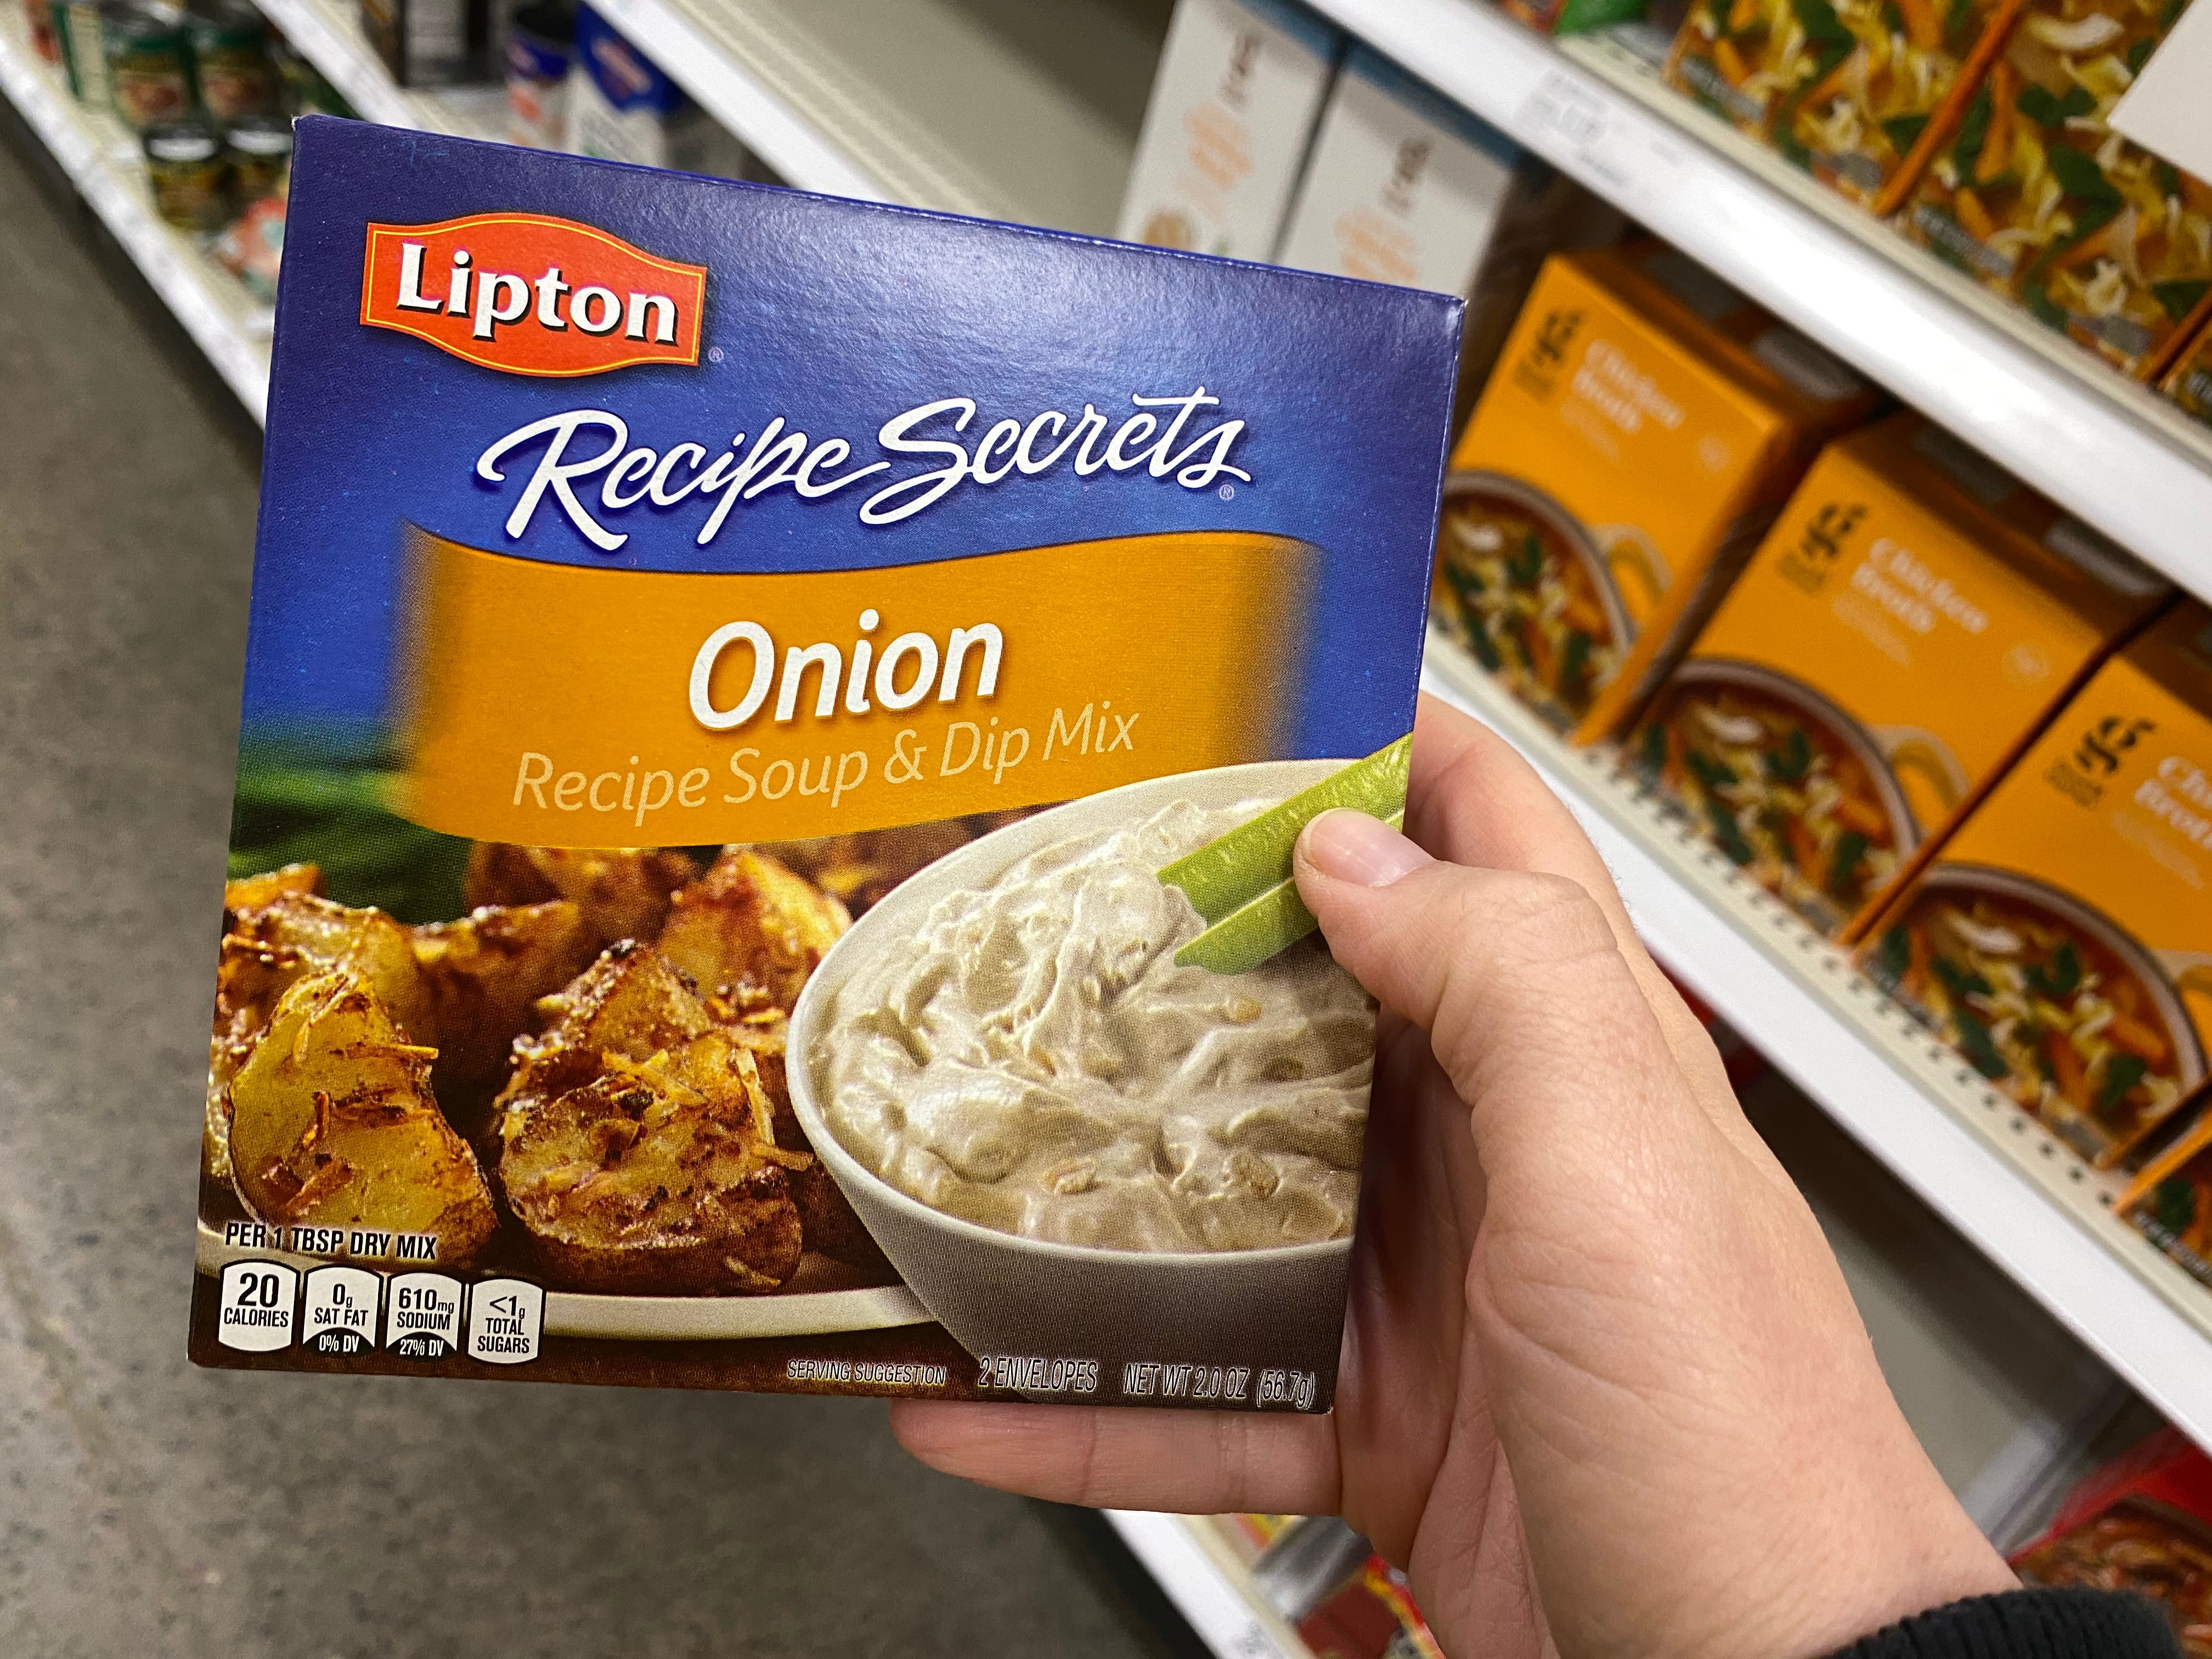 Hand holds up a box of Lipton onion soup mix in a grocery aisle.